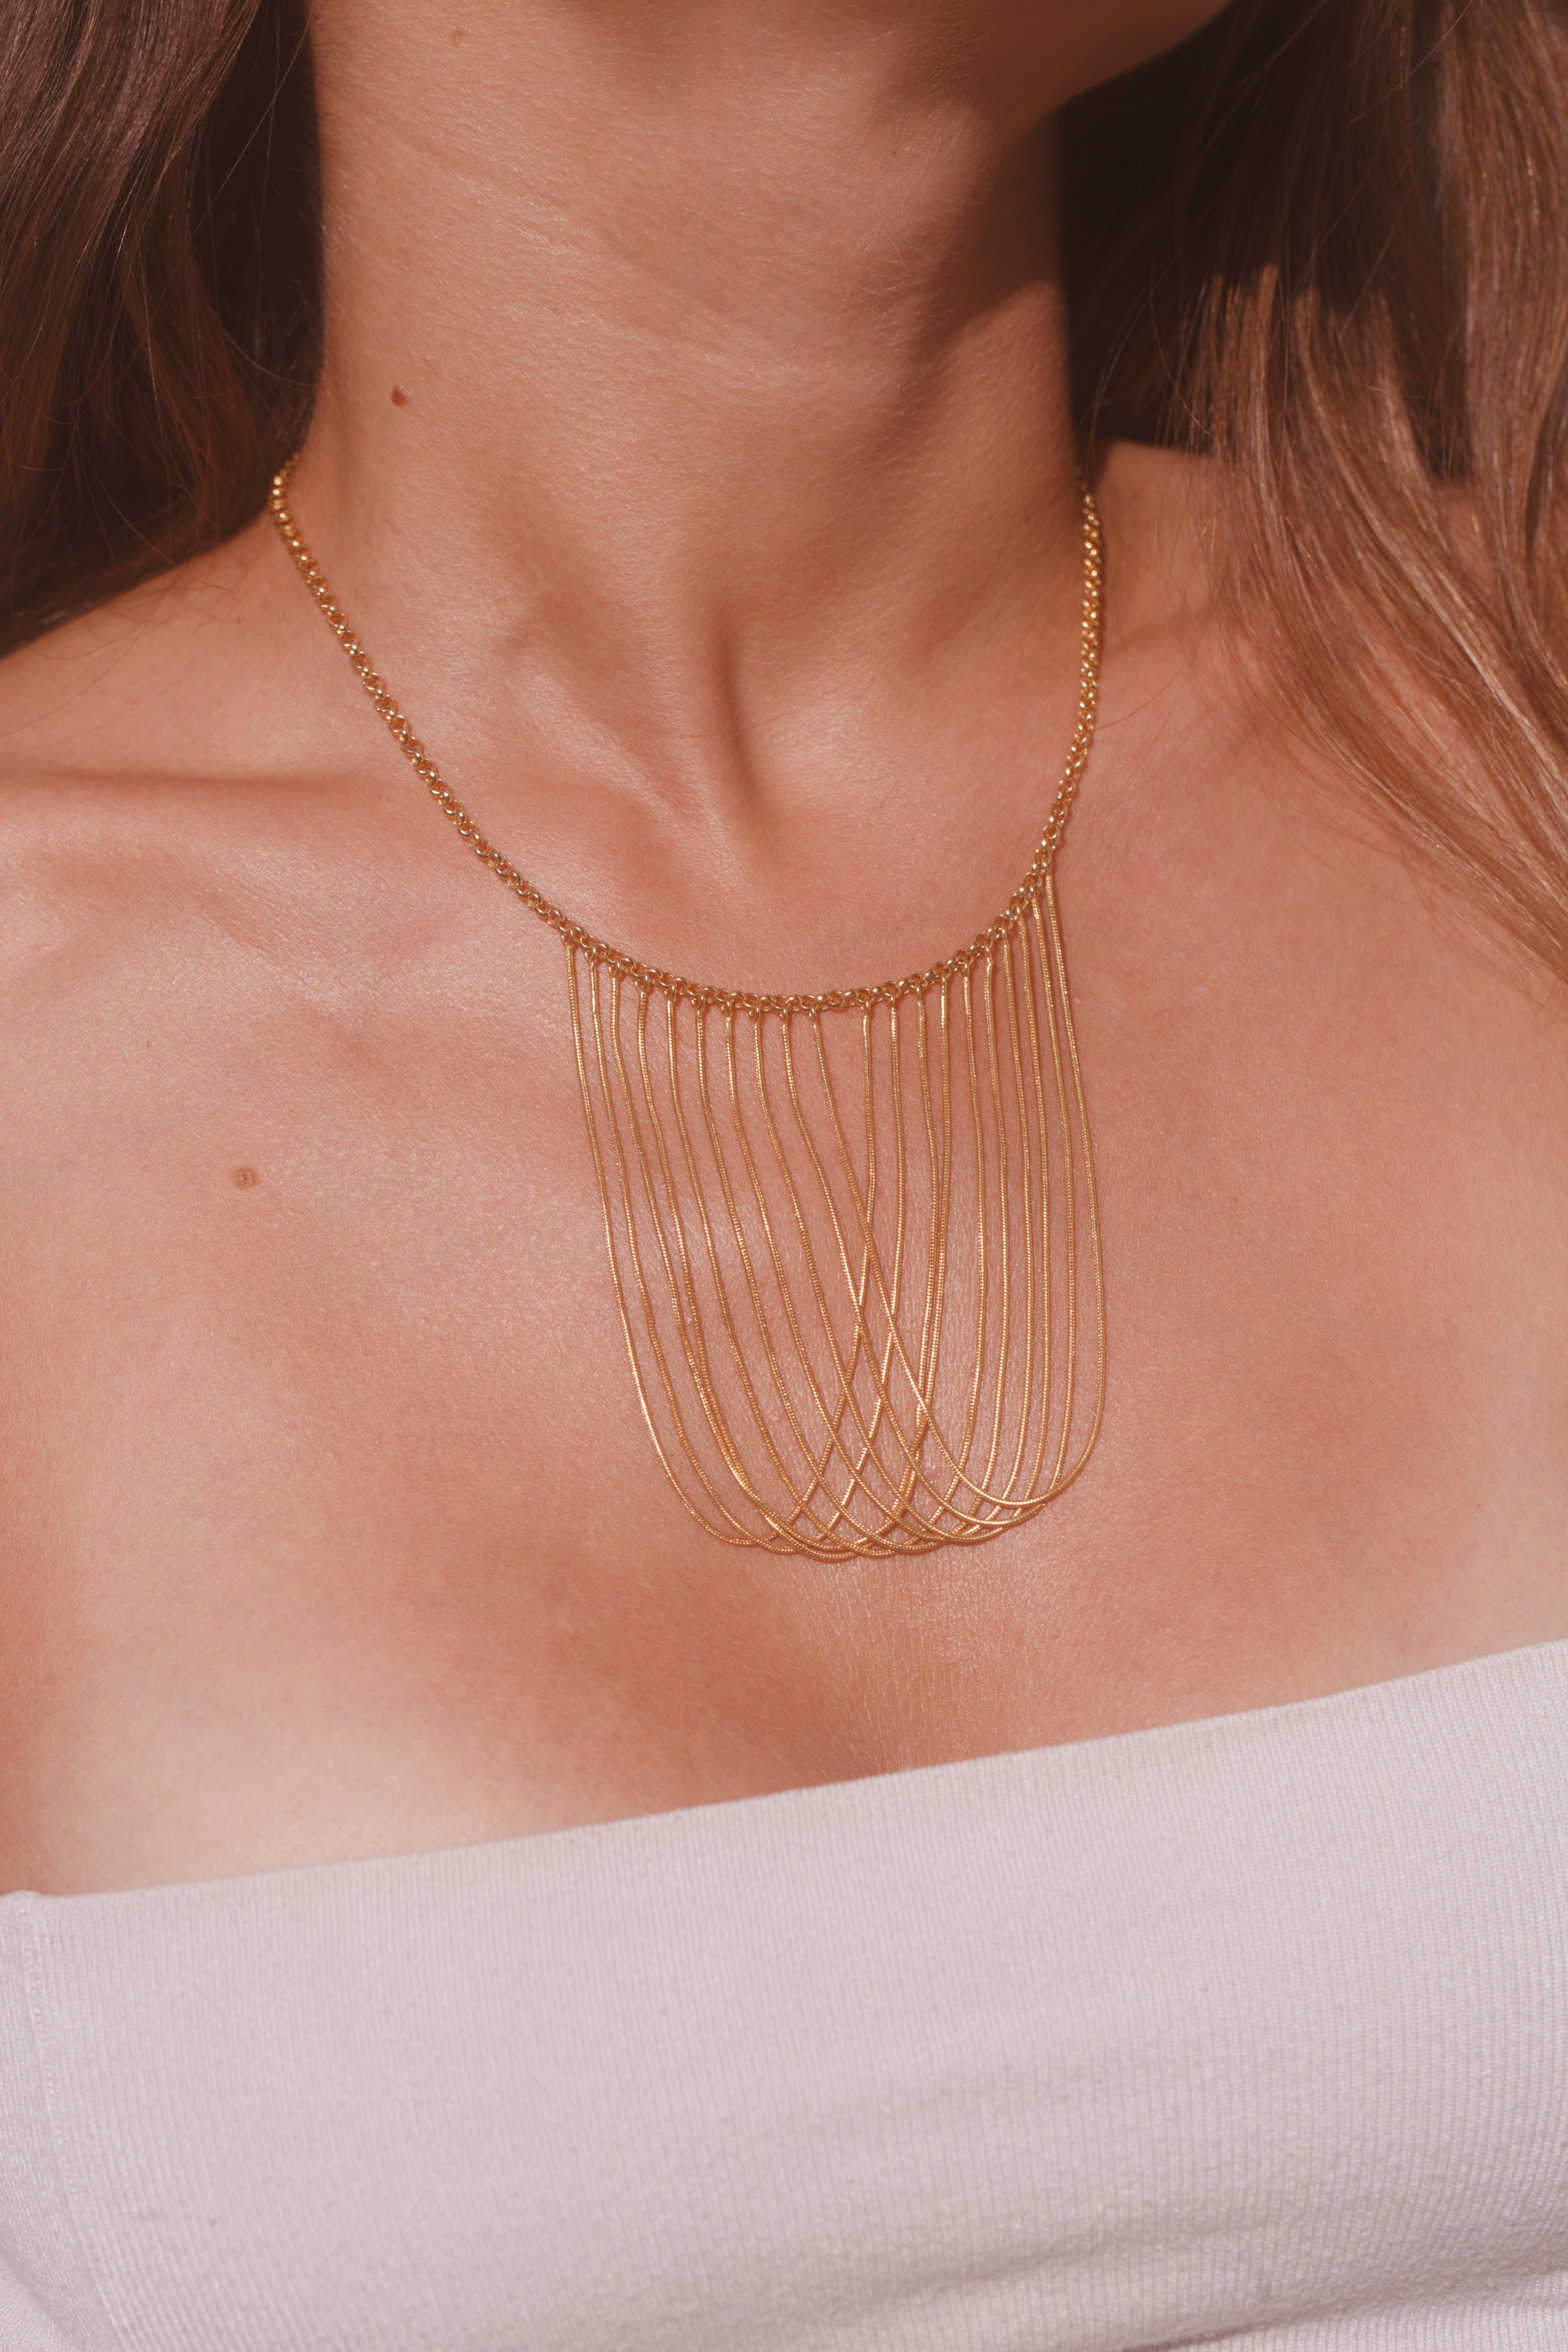 18k- rose gold plated brass statement necklace created to compliment and curess a woman's neckline. The movement of the snake chain creates a shiny liquid effect offering a very strong look. Every chain has been individually hand-cut and placed by